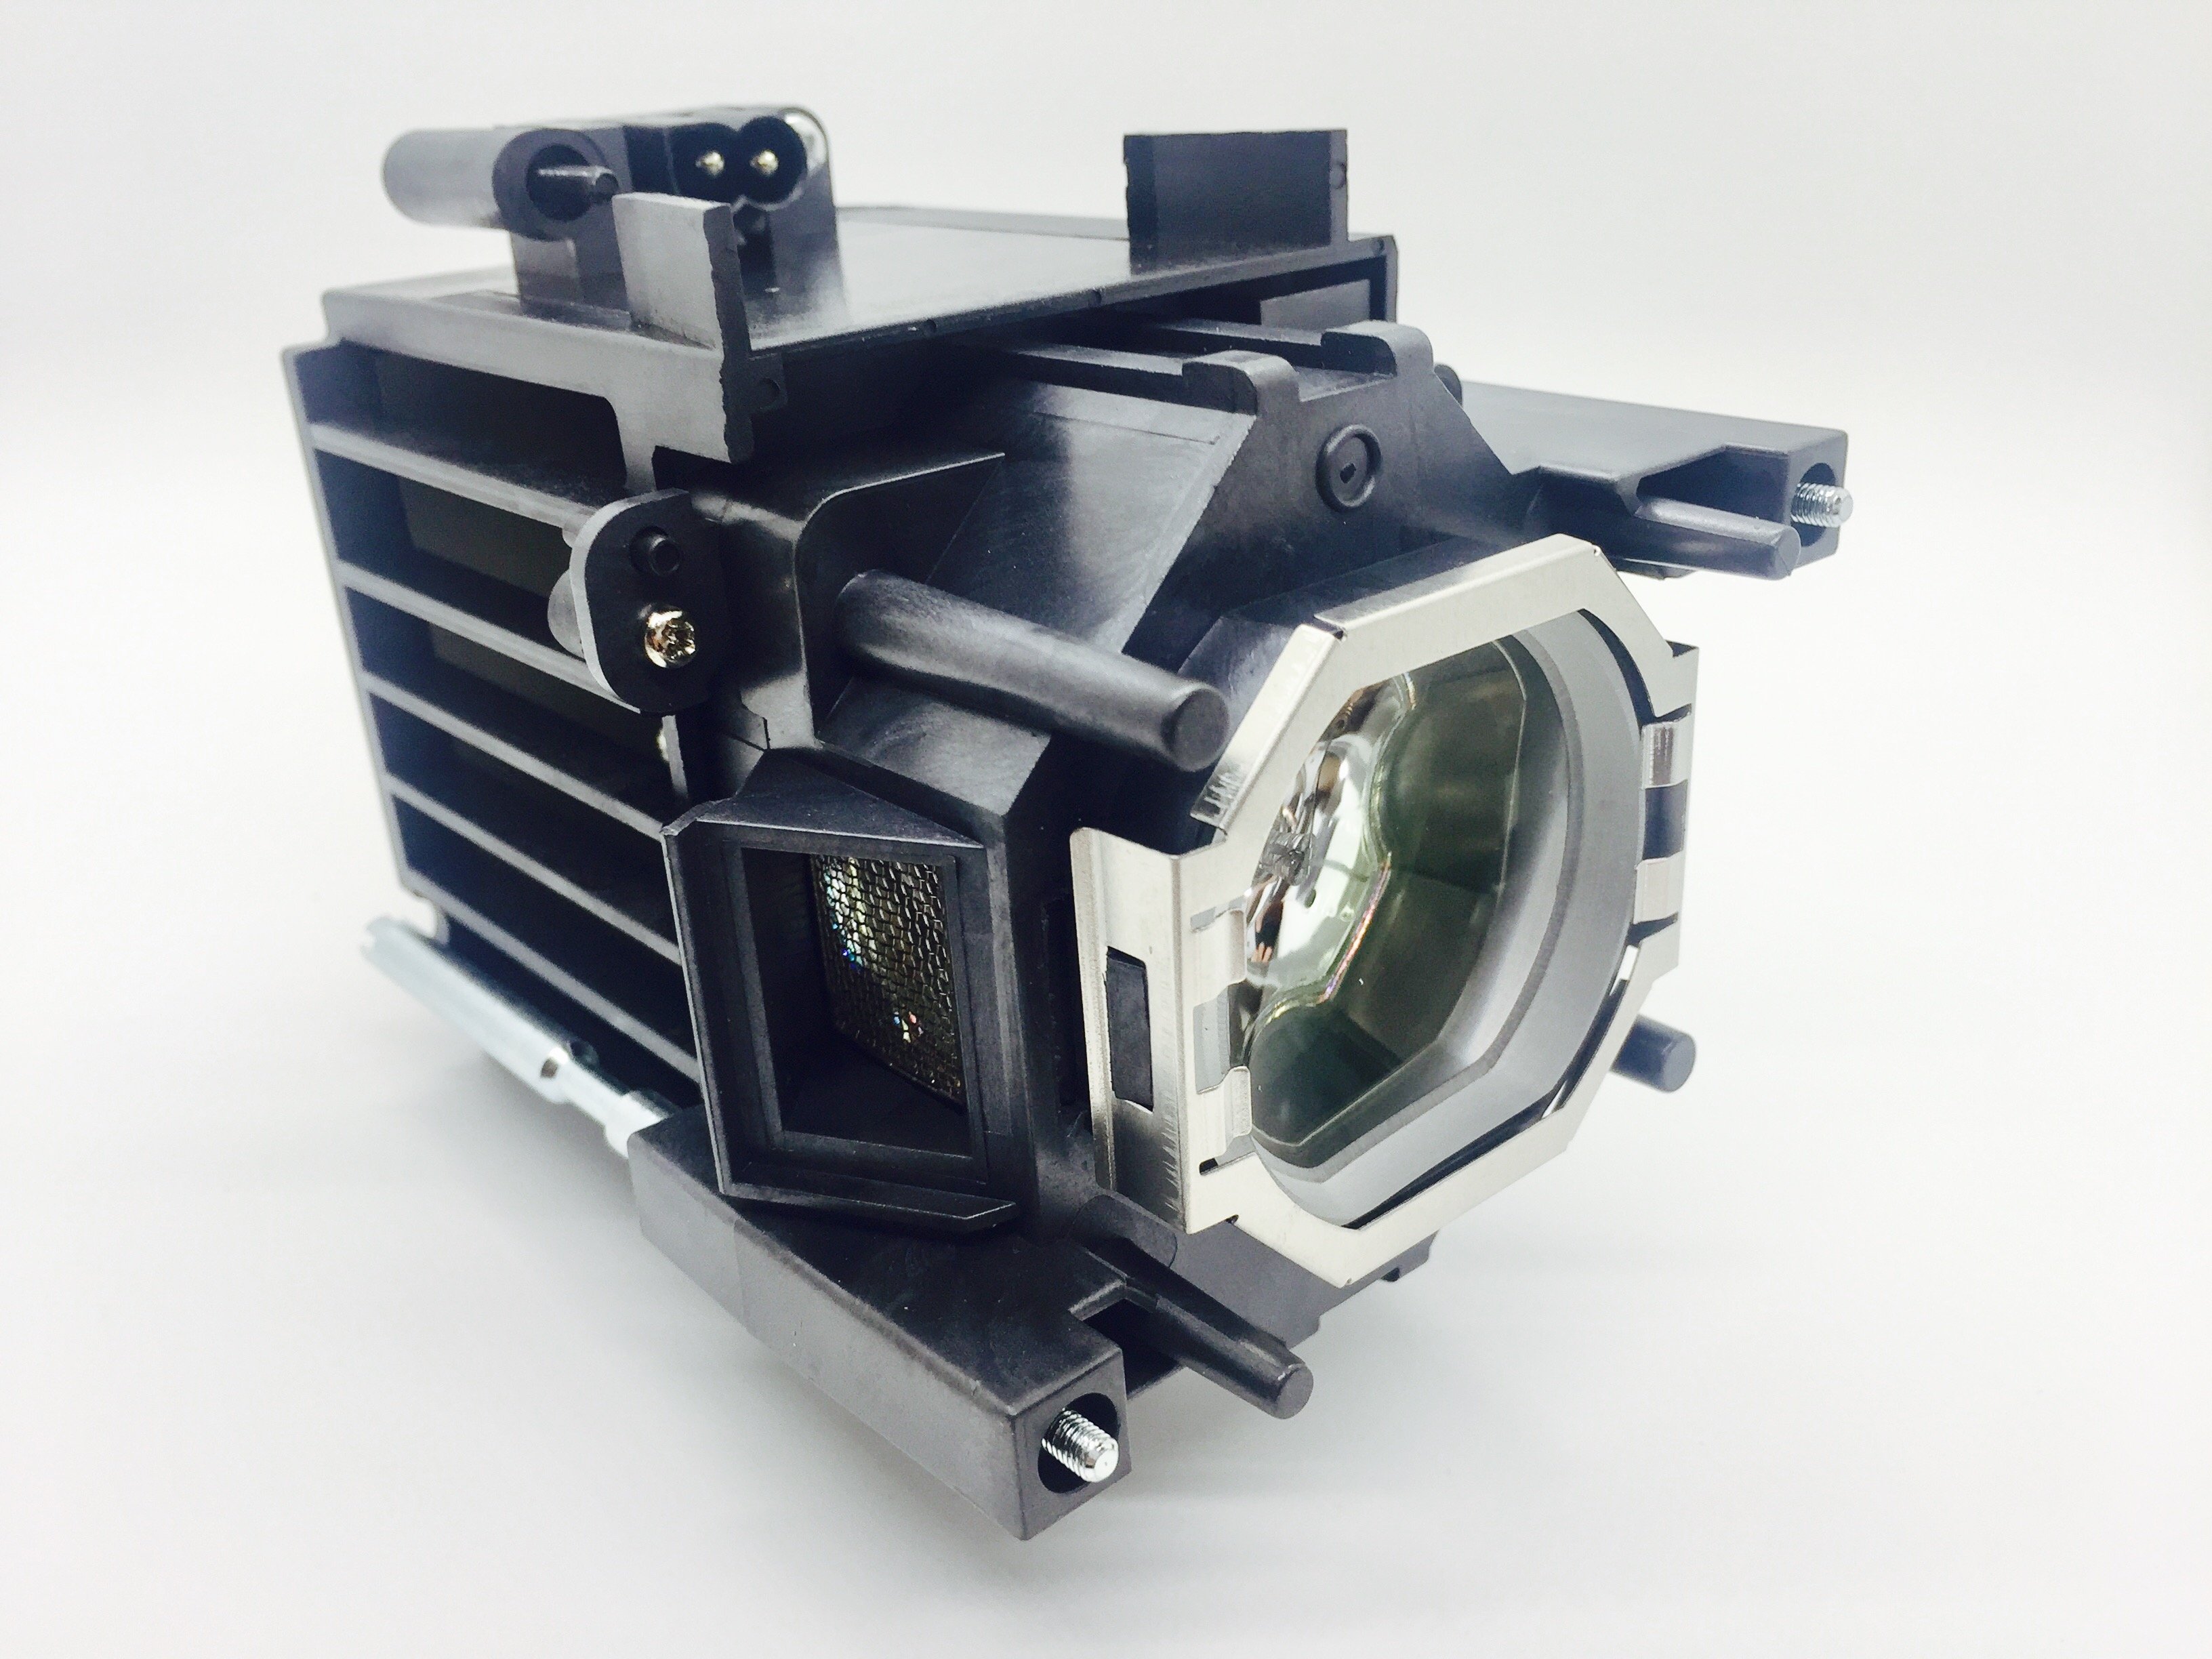 OEM Lamp & Housing for the Sony VPL-FX35 Projector - 1 Year Jaspertronics Full Support Warranty! - image 2 of 2